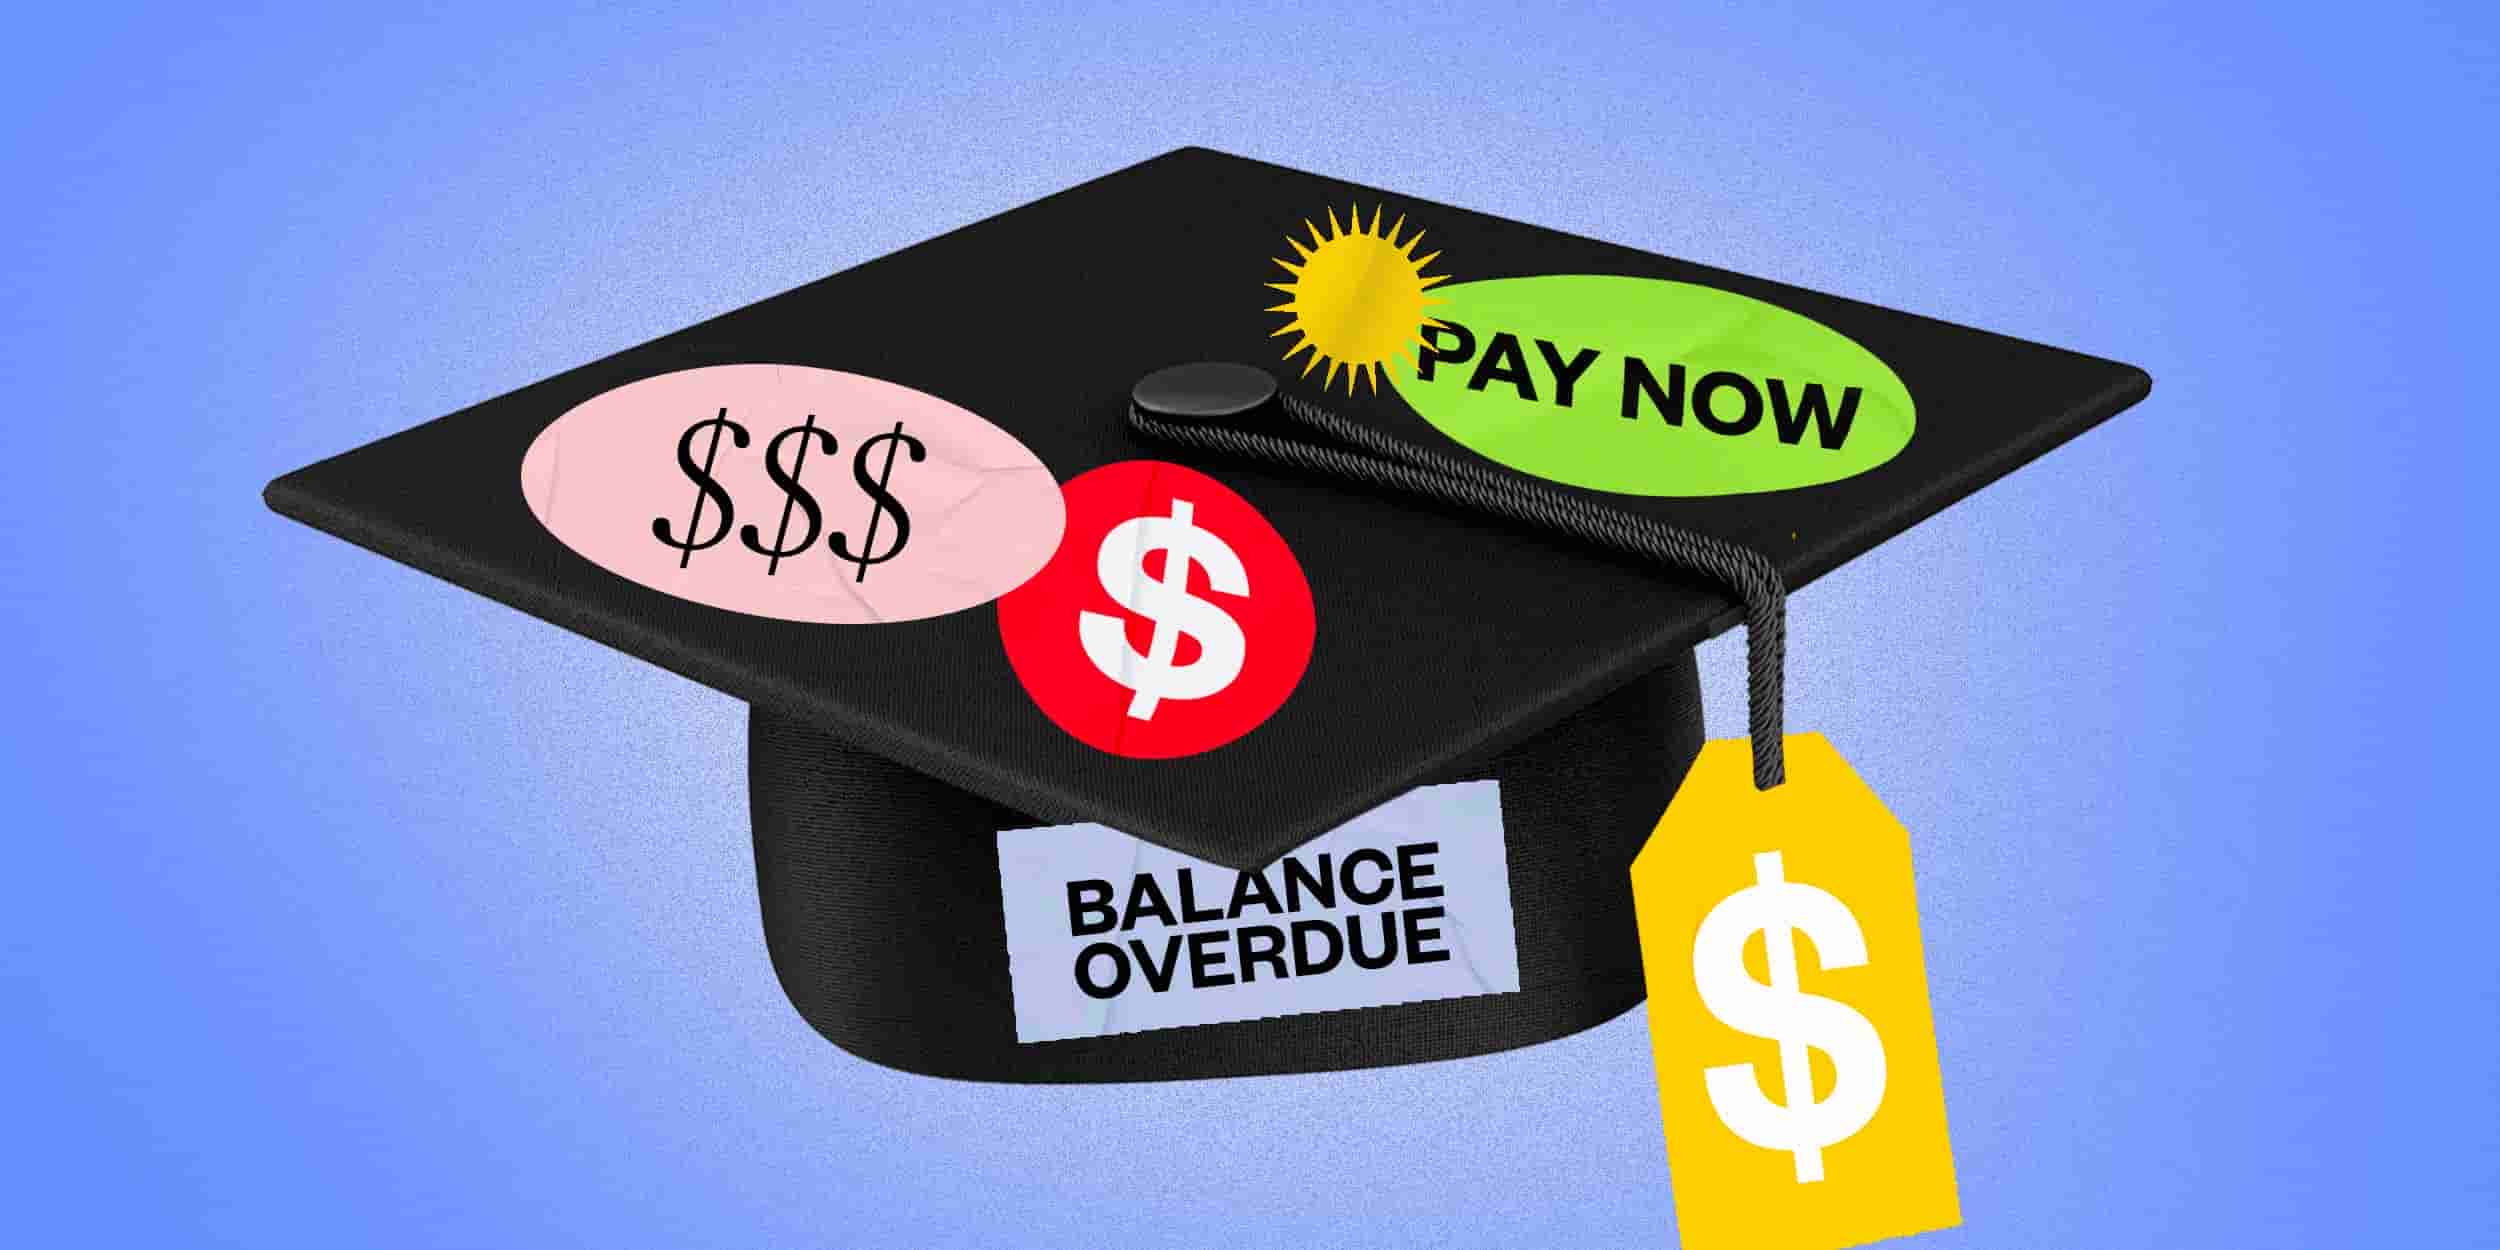 Student Loan Forgiveness Cancelled: To Pay Again This Summer